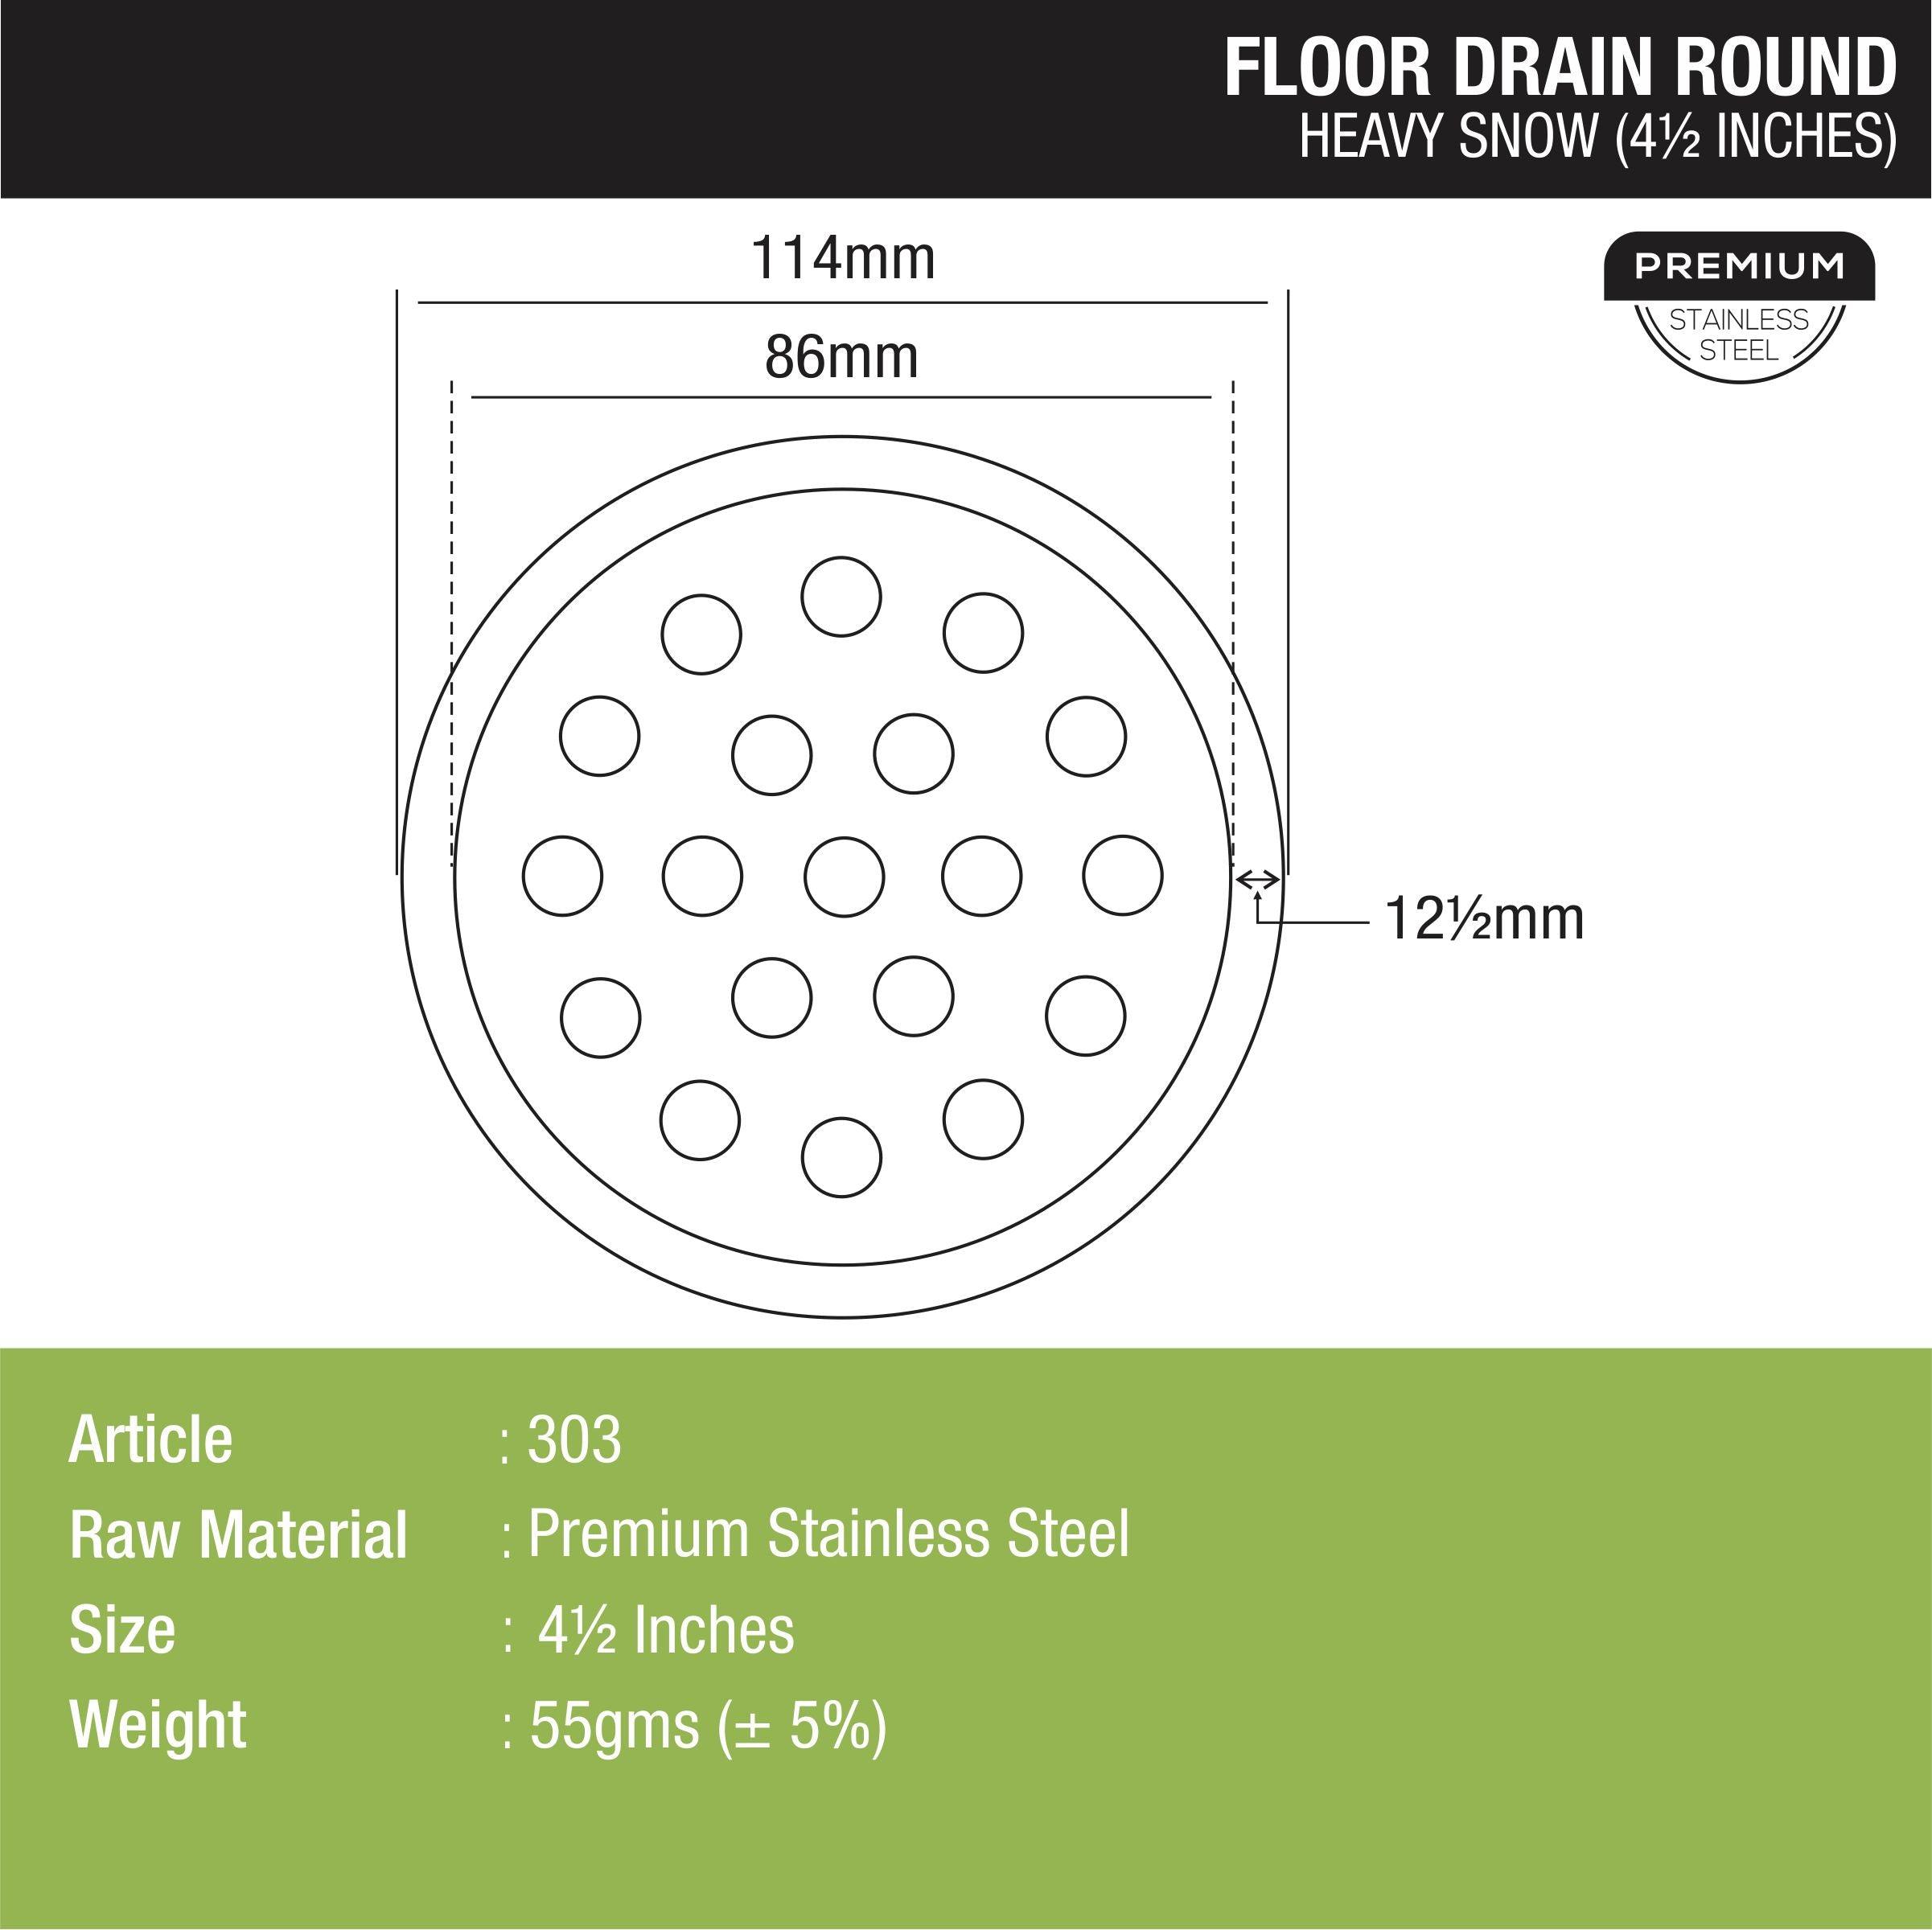 Heavy Snow Round Floor Drain (4.5 Inches) dimensions and sizes